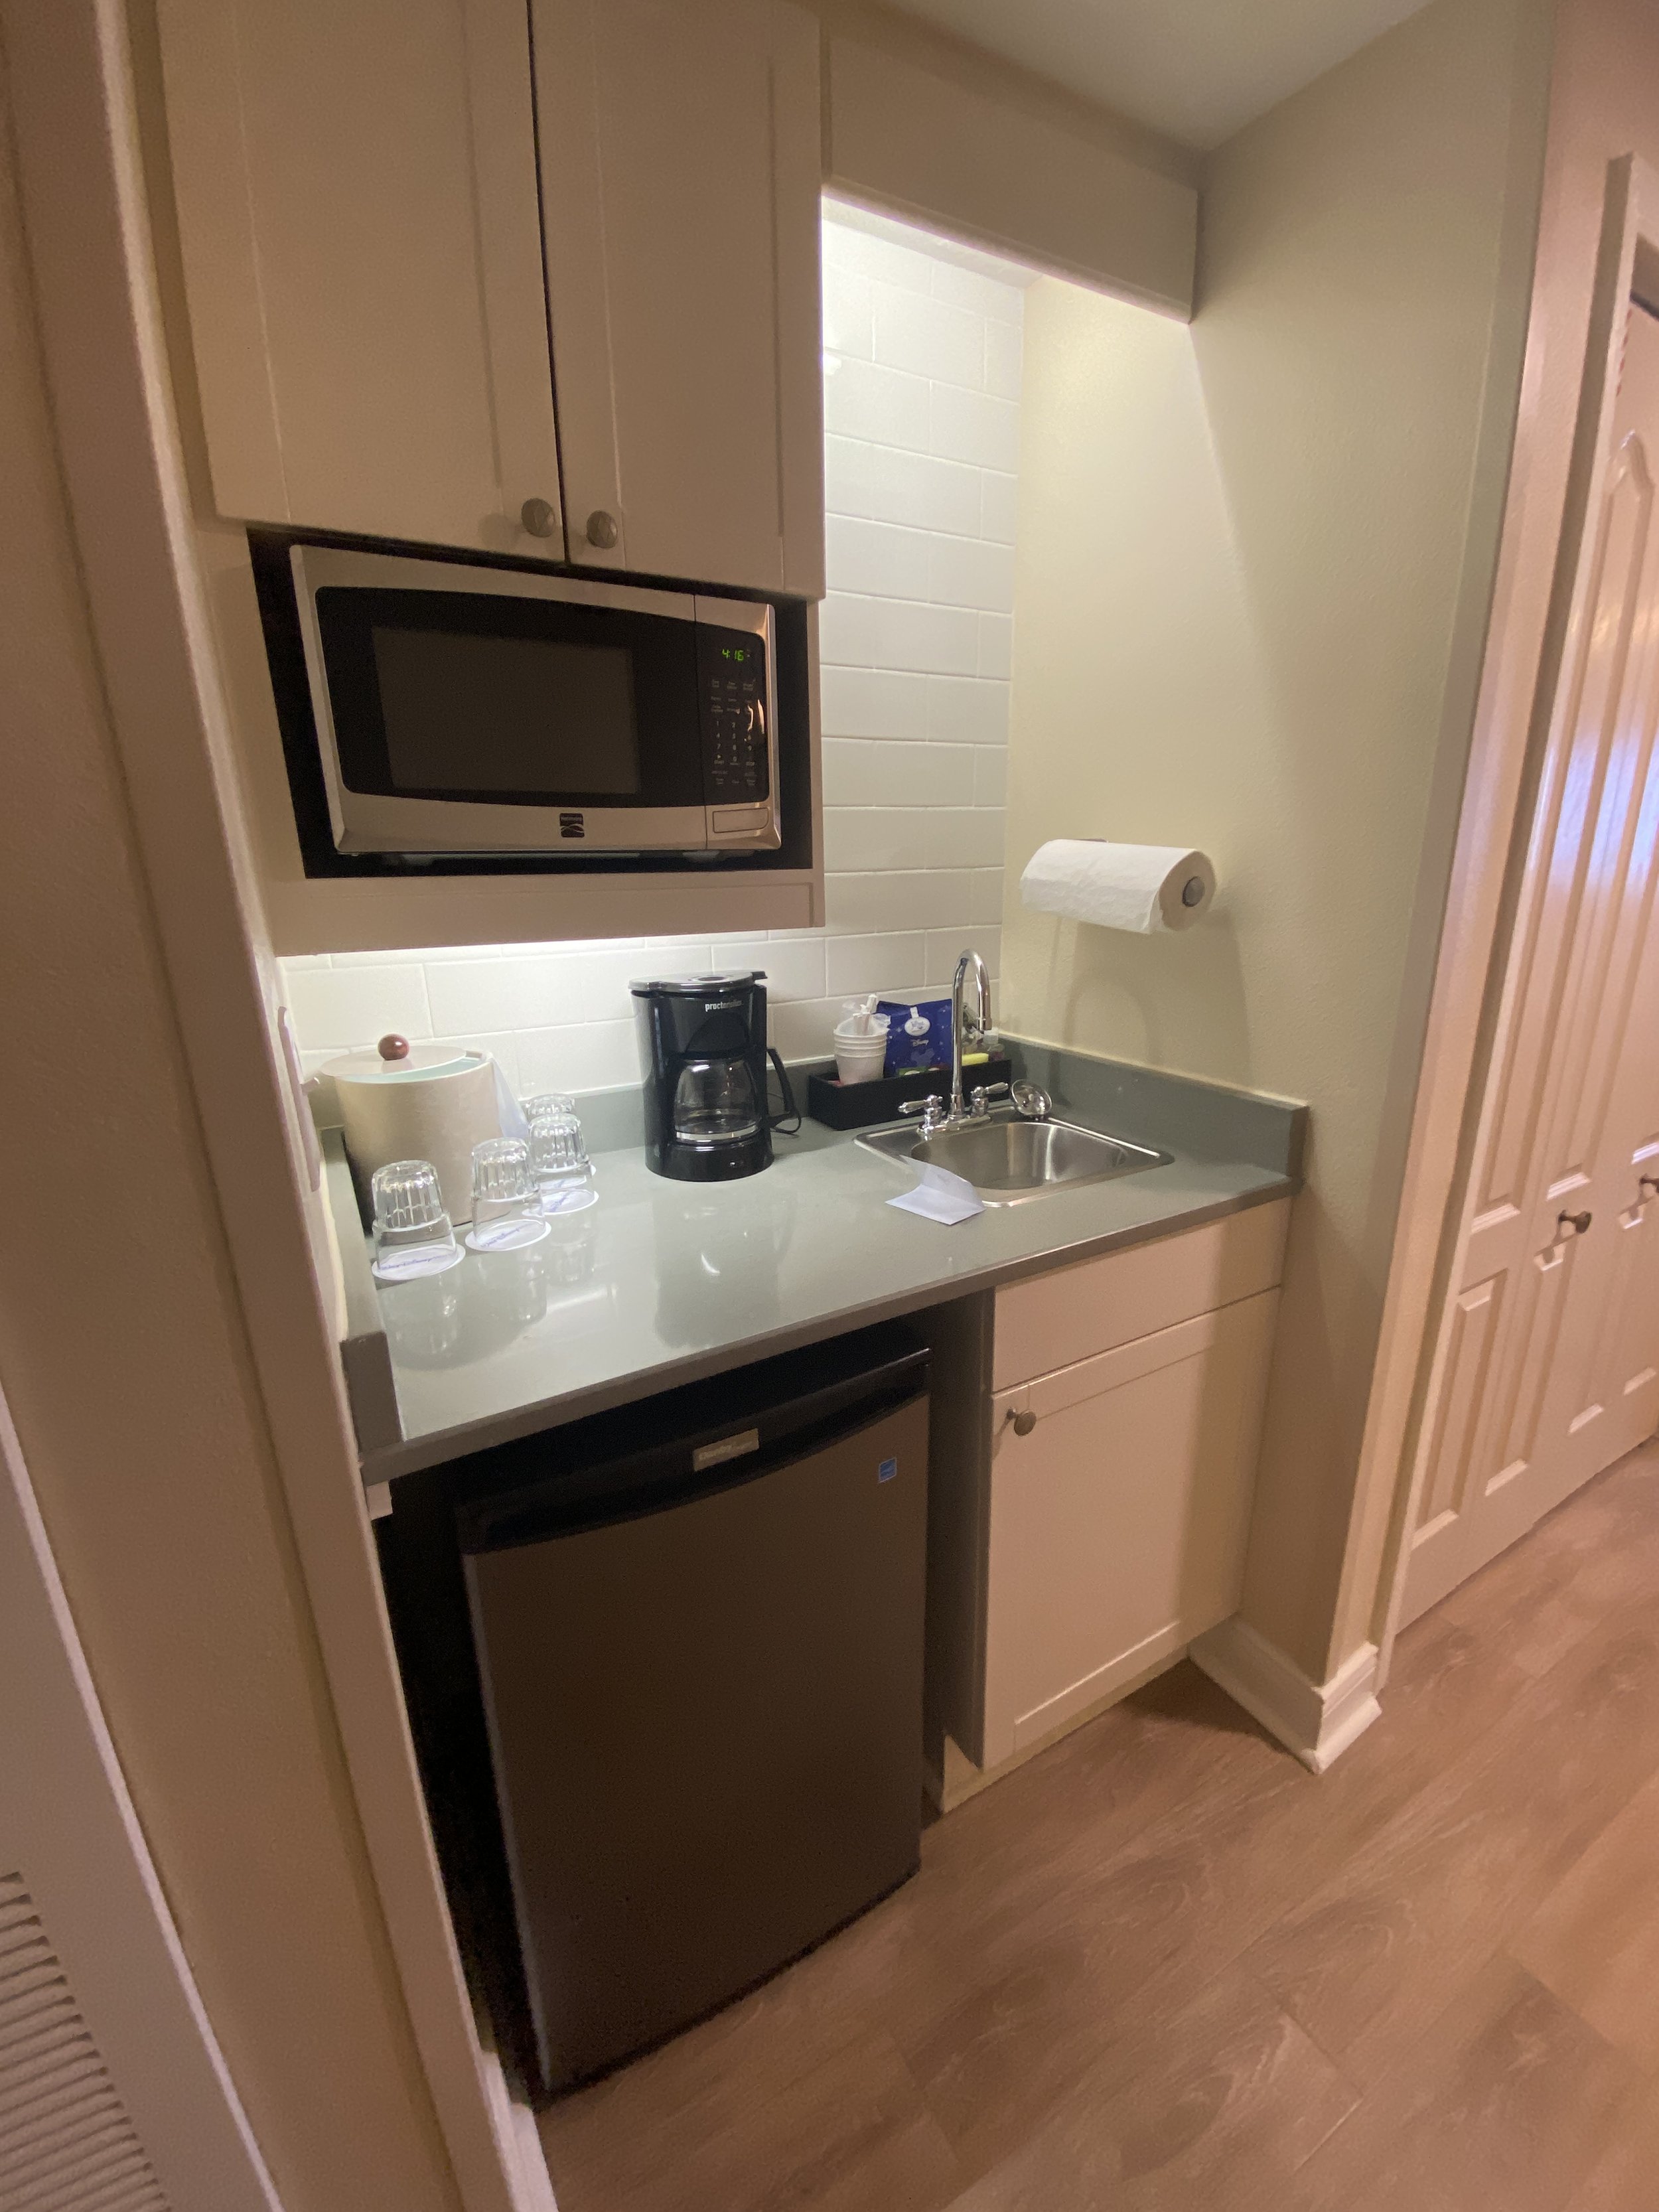  Rooms have a kitchenette with a microwave, mini-fridge and small sink.    The cupboards are stocked with plates, cups, glasses, bowls and utensils.    Most importantly, coffee is complimentary! It’s Joffrey’s Coffee - the same brand that’s provided 